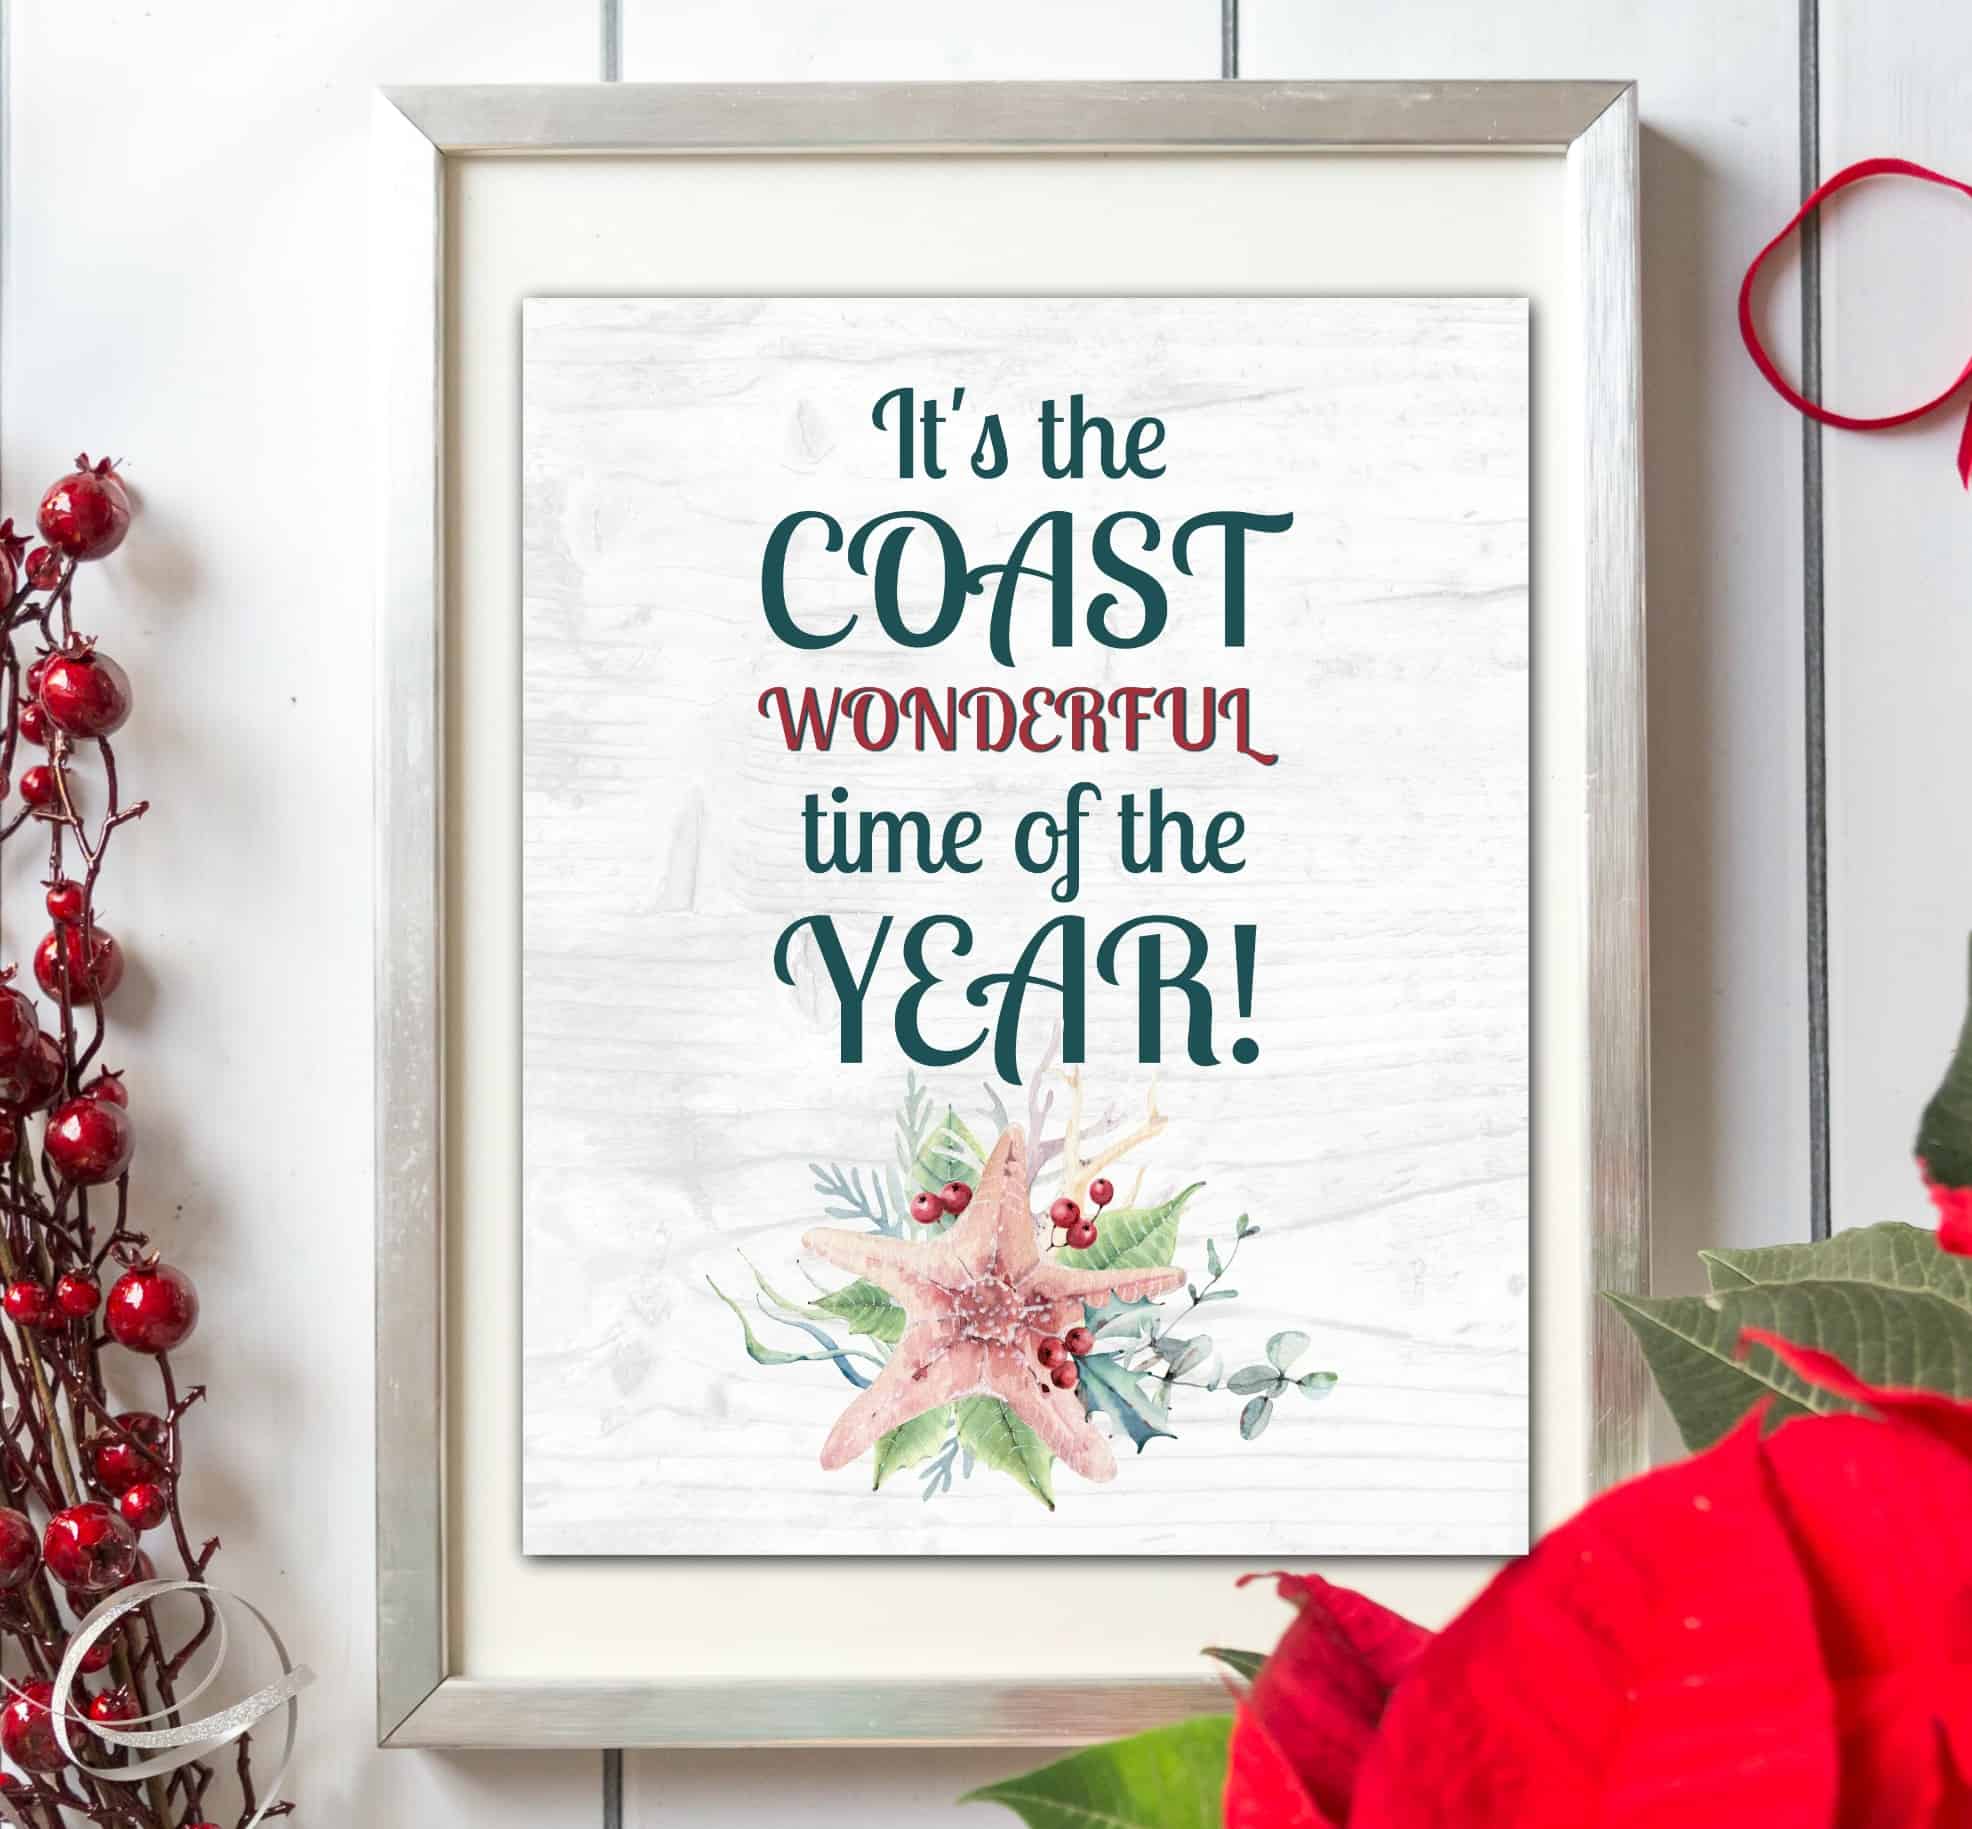 free watercolor printables christmas winter photo with starfish and greenery and the words its the coast wonderful time of the year